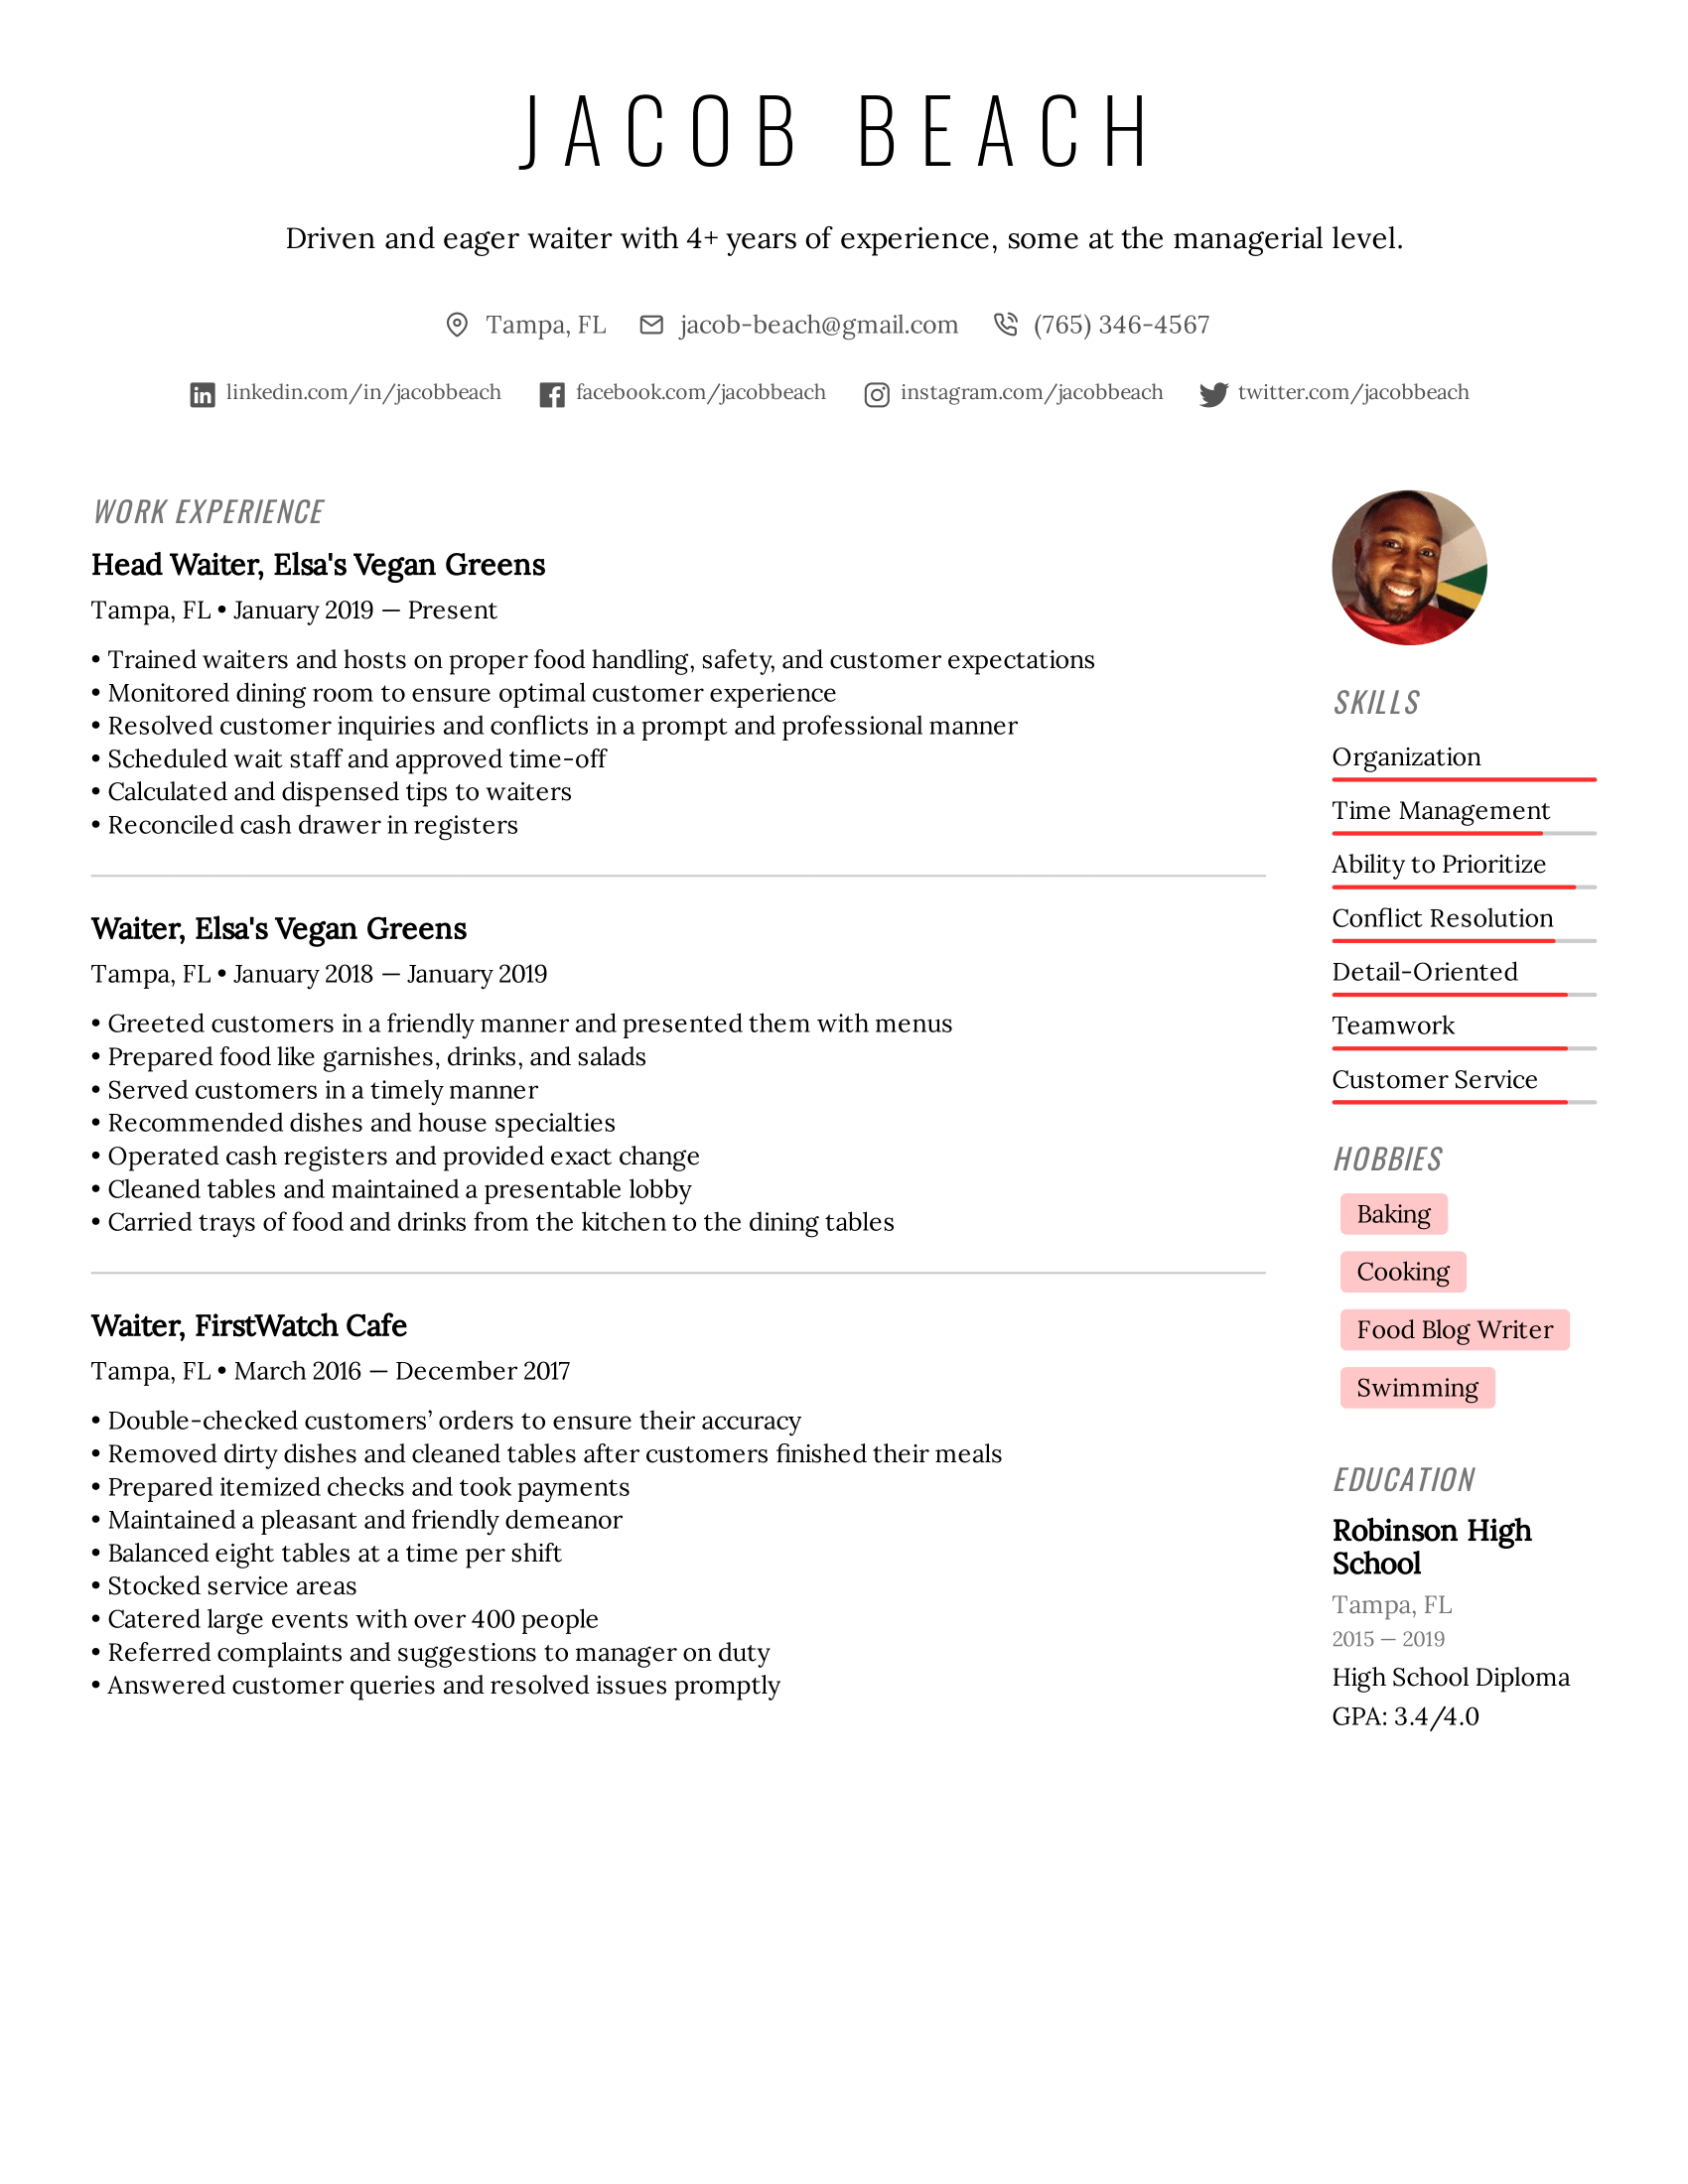 How to Include Hobbies on Your Resume in 2020 (With Examples)